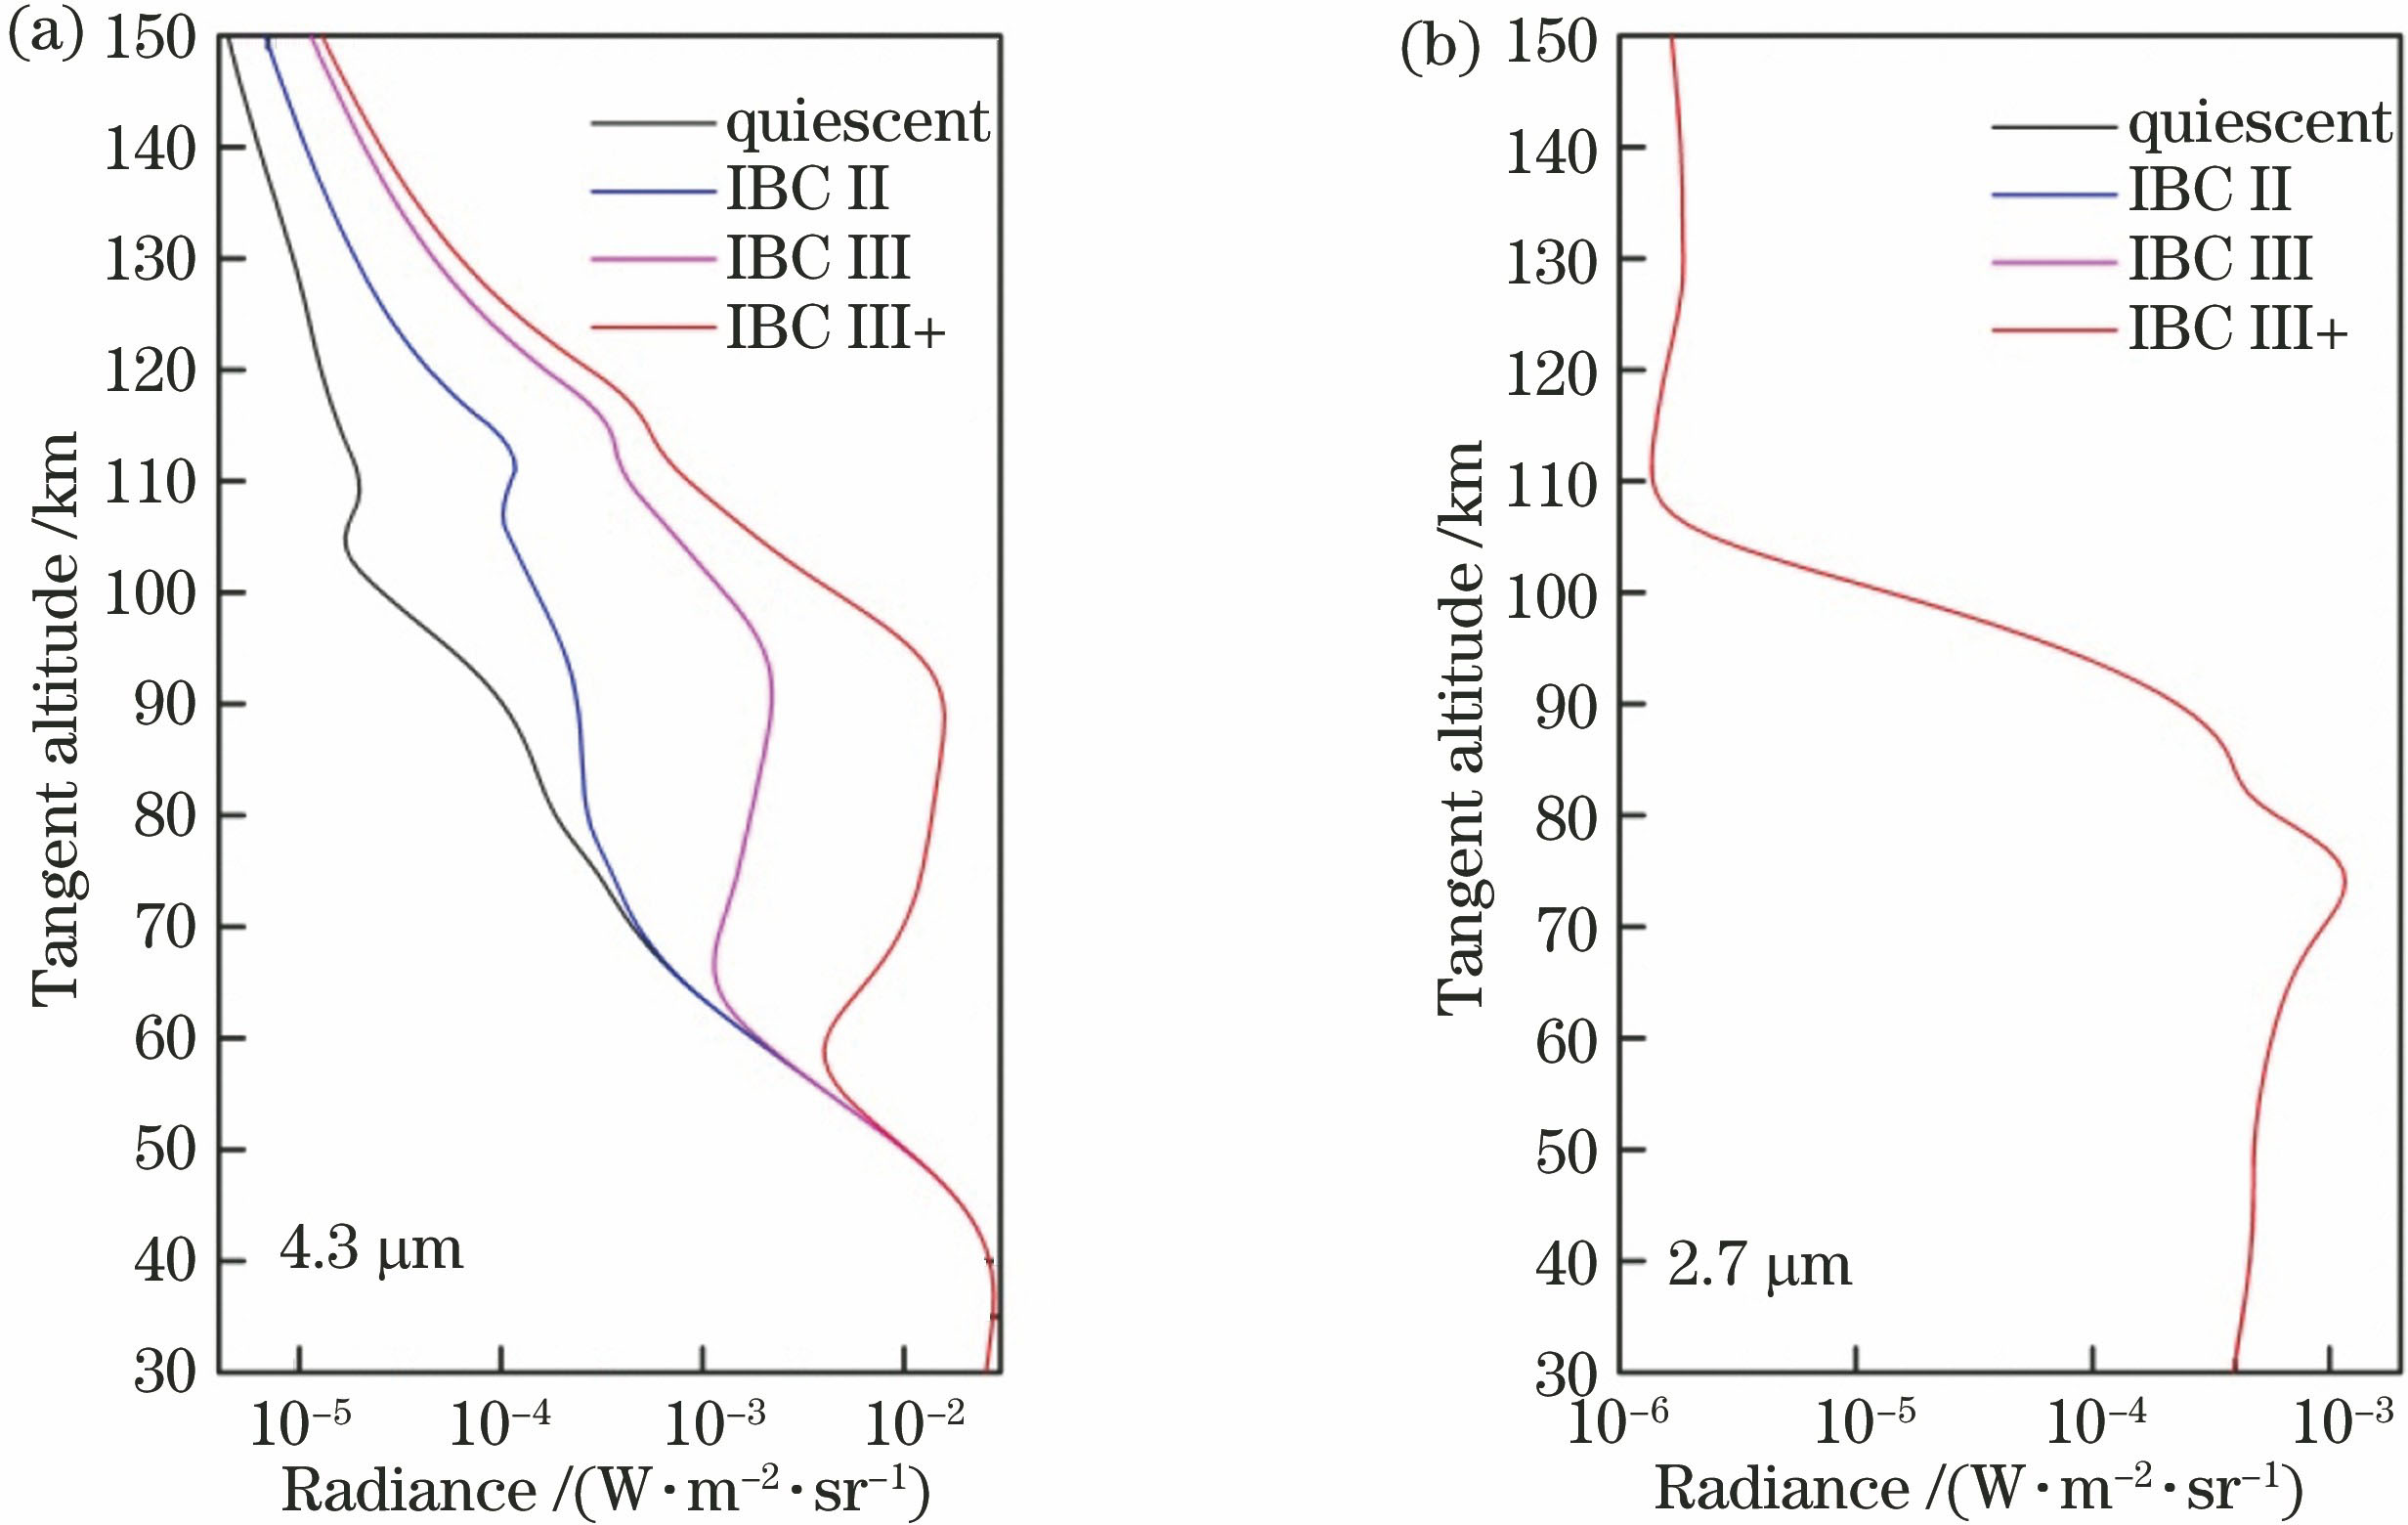 Limb radiance profiles at different CO2 spectral bands. (a) 4.3 &#x003bc;m; (b) 2.7 &#x003bc;m